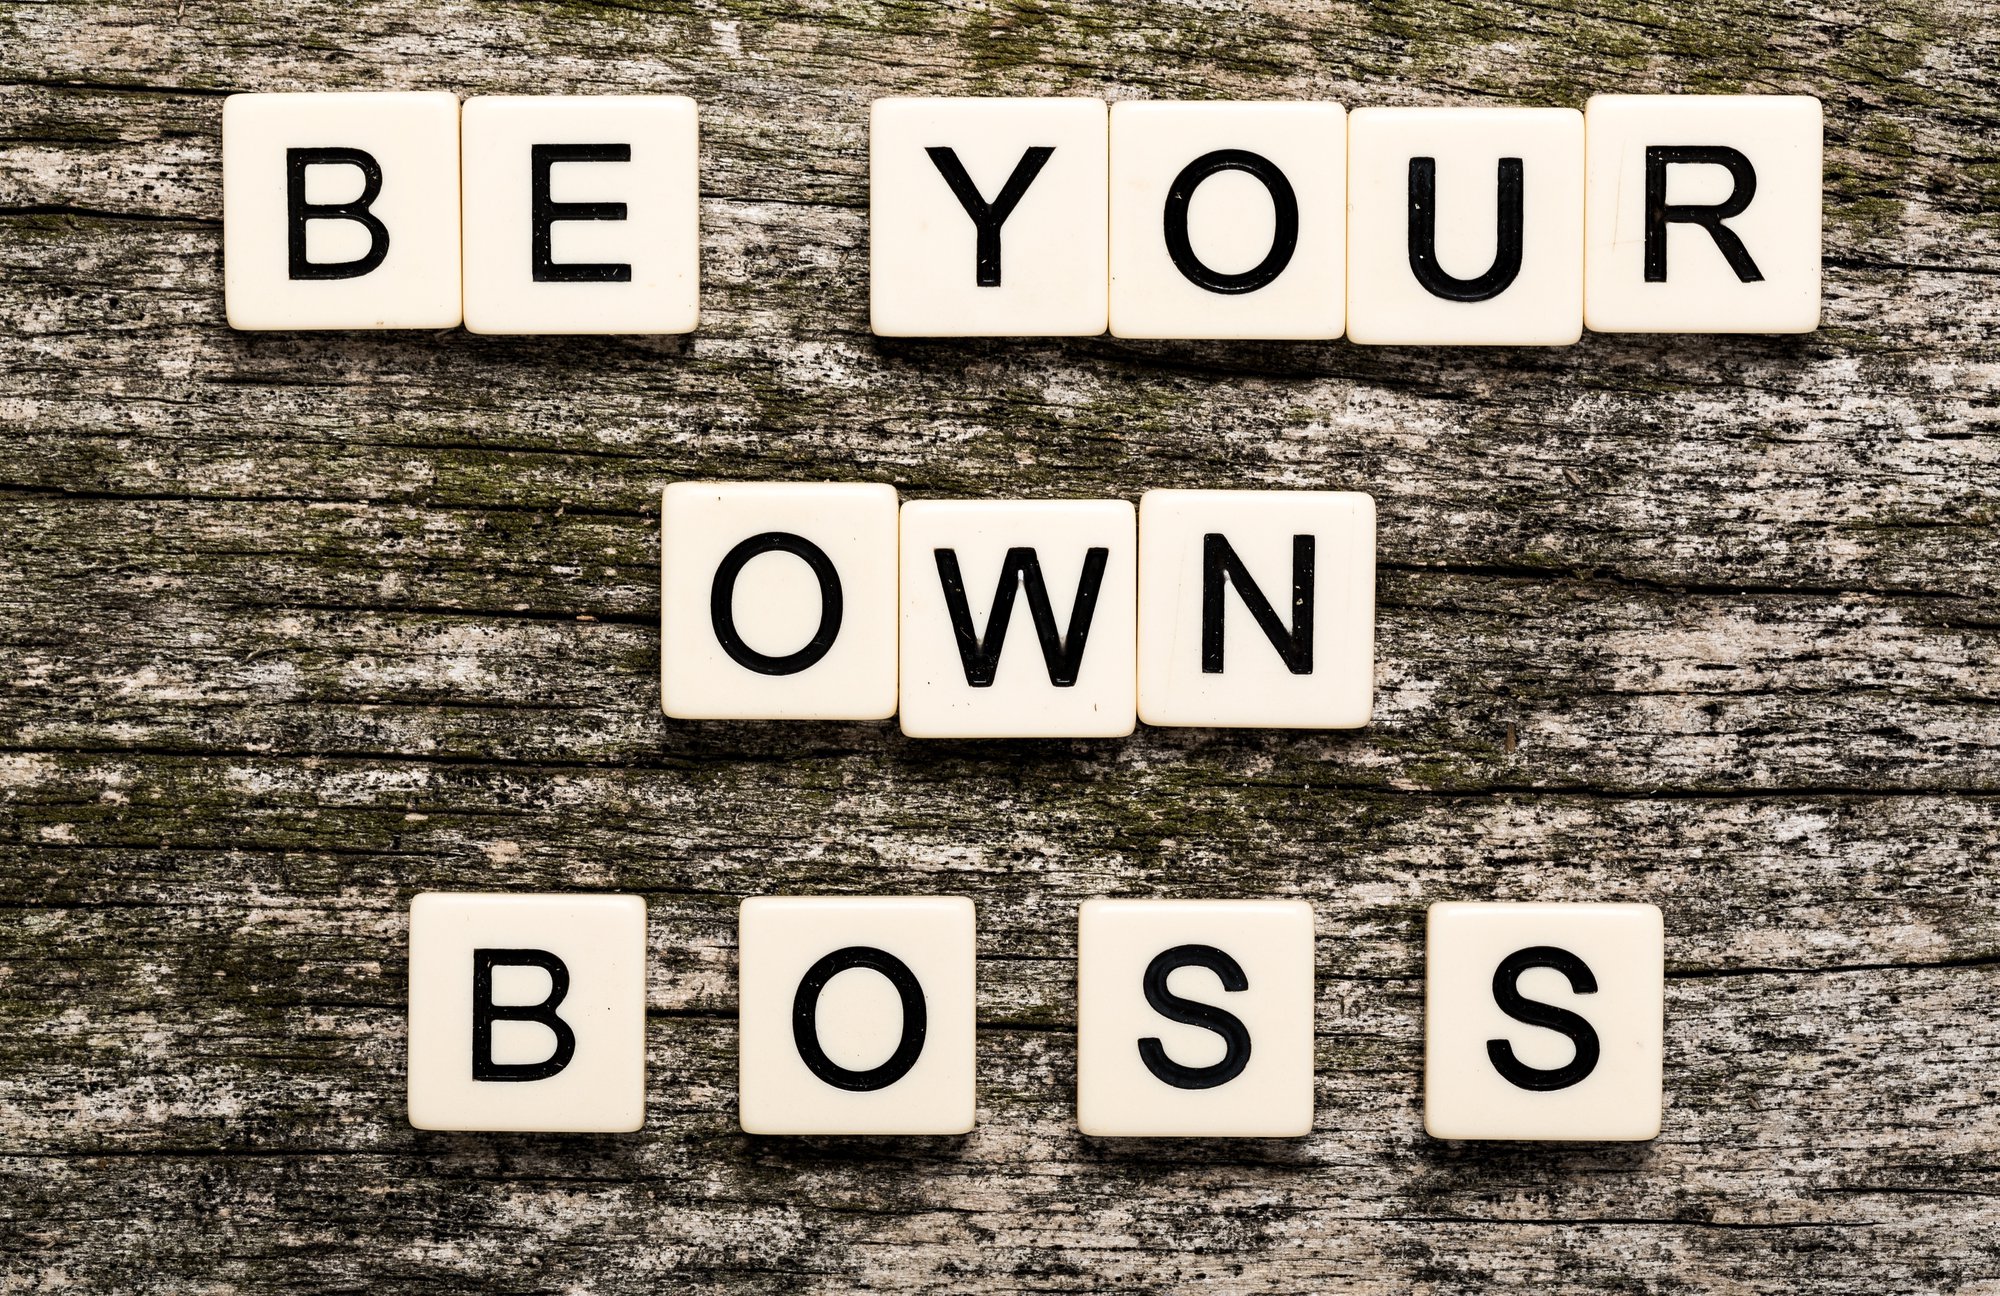 Your own boss with the